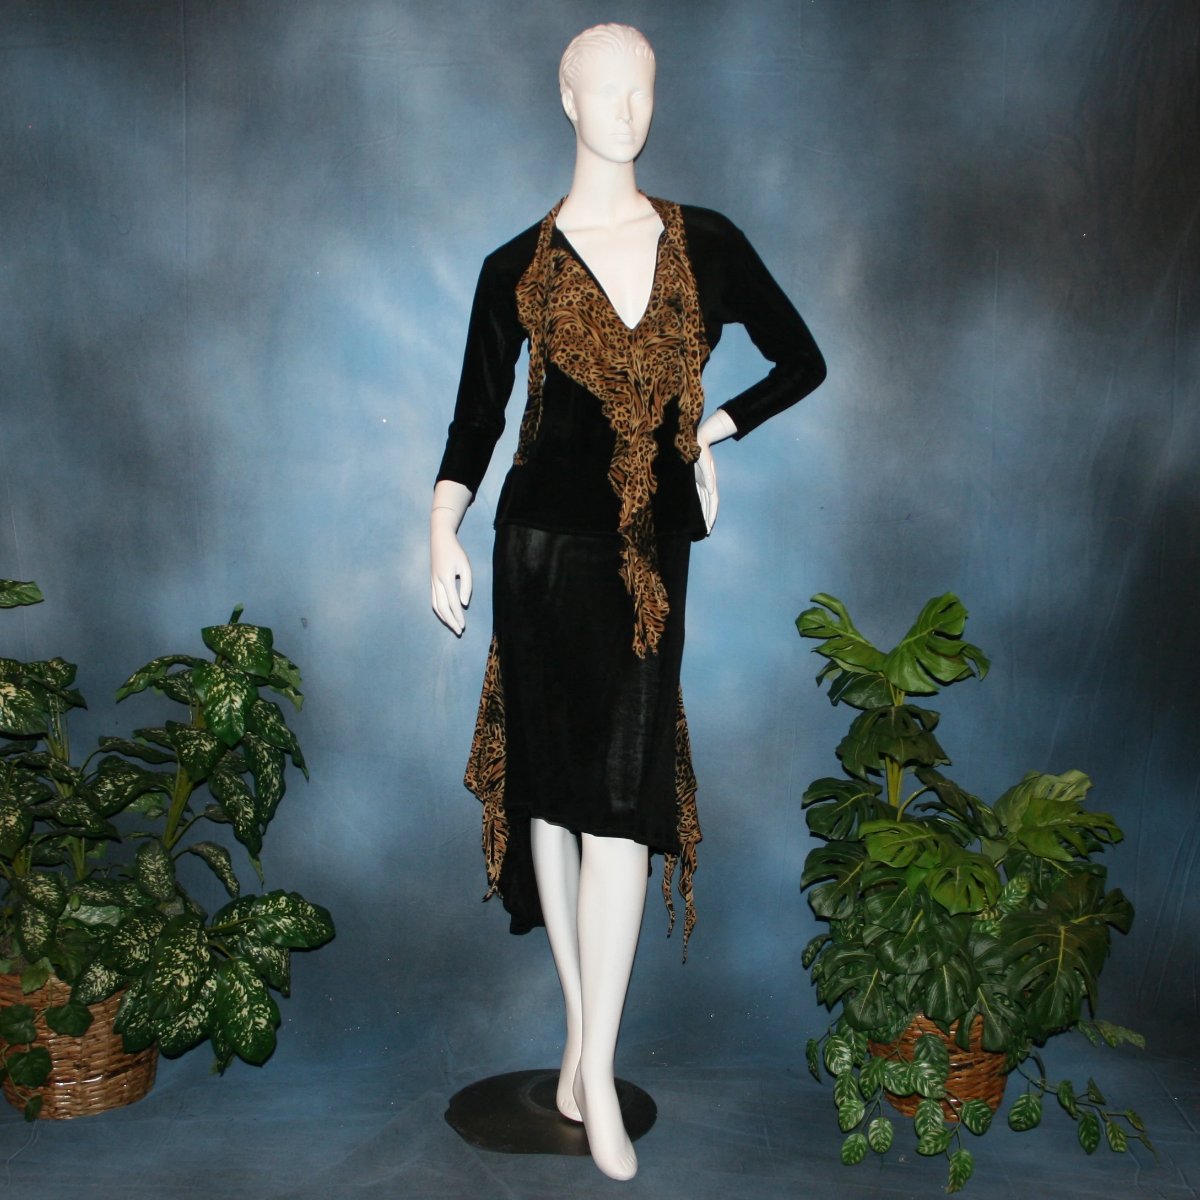 Black ballroom dance top with cheetah ruffly neck & tie of luxurious black slinky and black Latin/rhythm flaired skirt with cheetah print slinky ruffly accents, which drapes down longer in the back. Great set for ballroom teachers!Tie on top can be worn open or closed. 